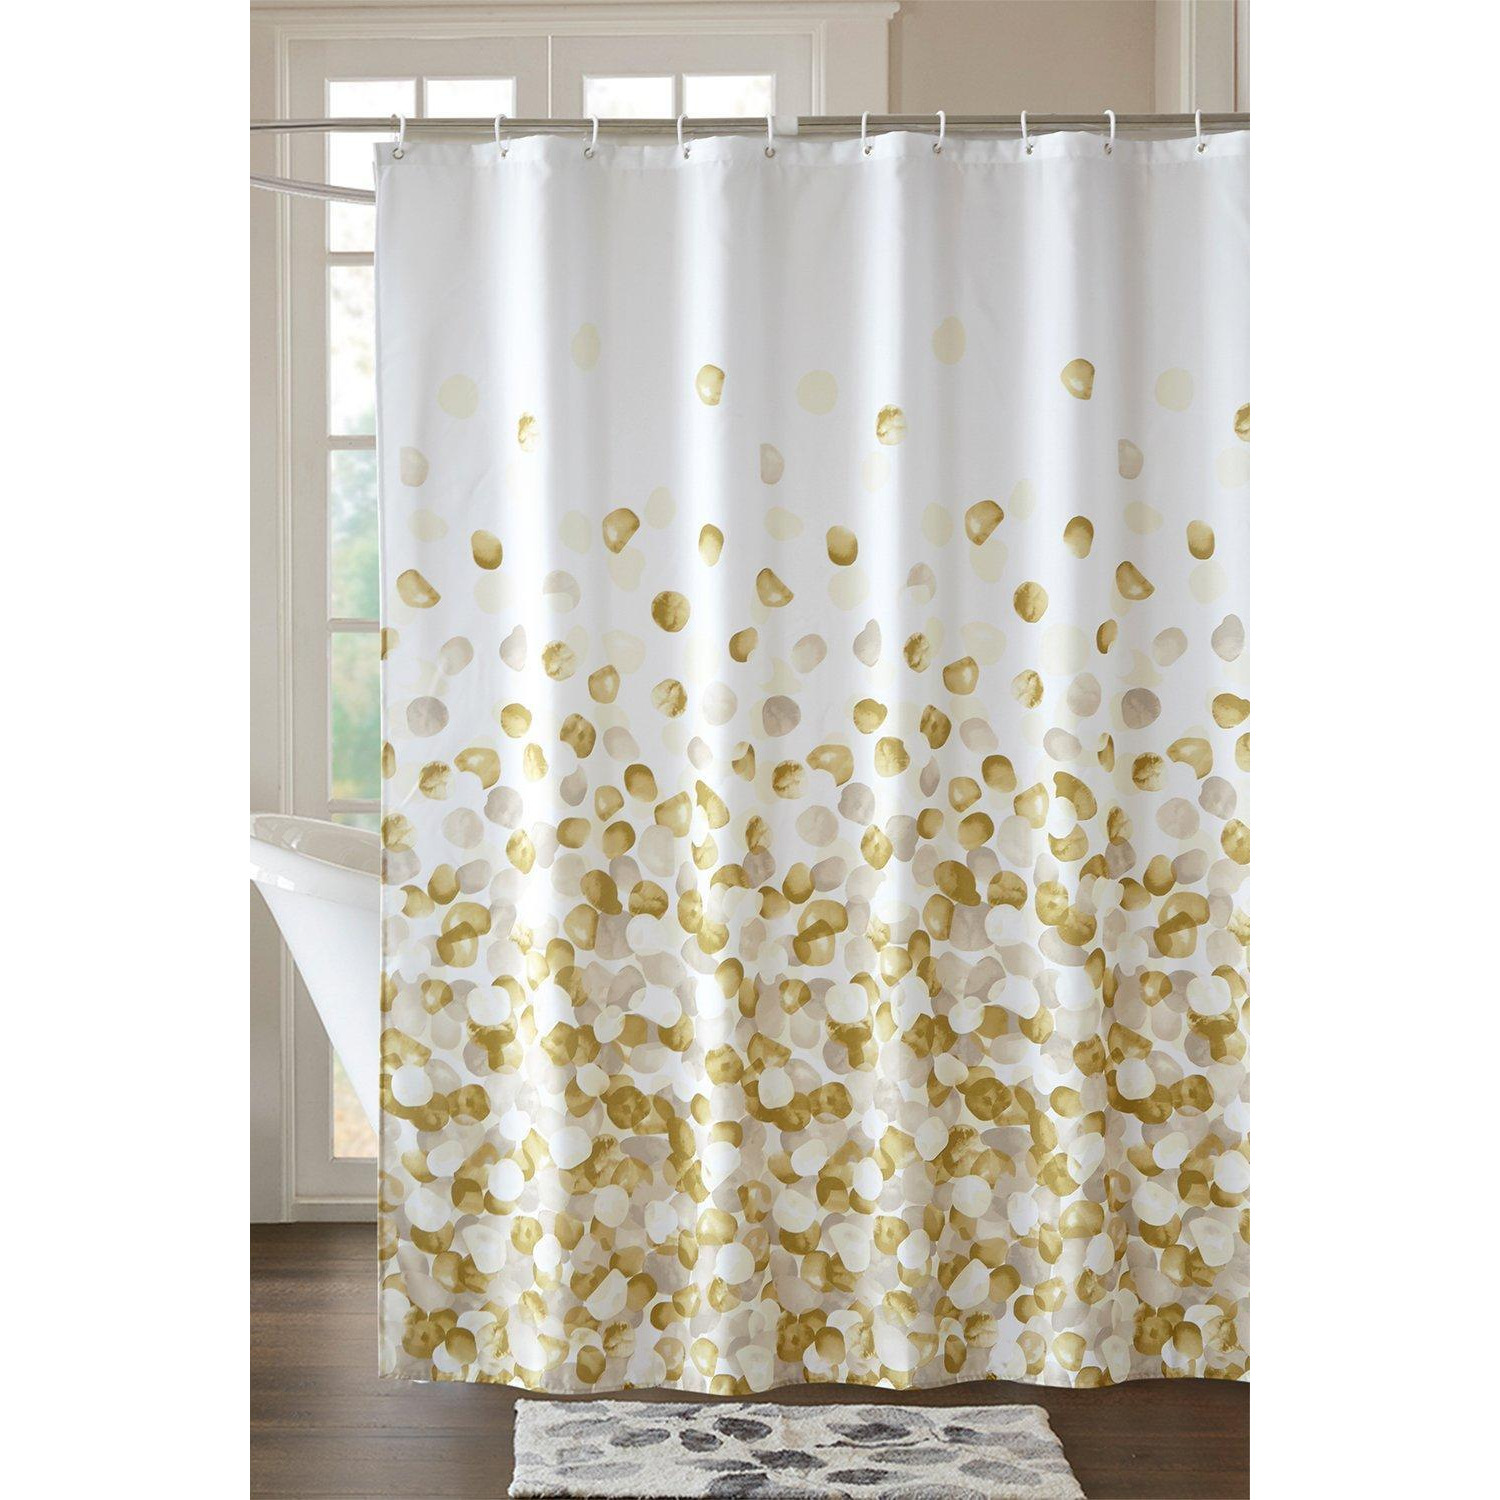 Gold Pebble Printed Polyester Shower Curtain - 180cm x 180cm - image 1